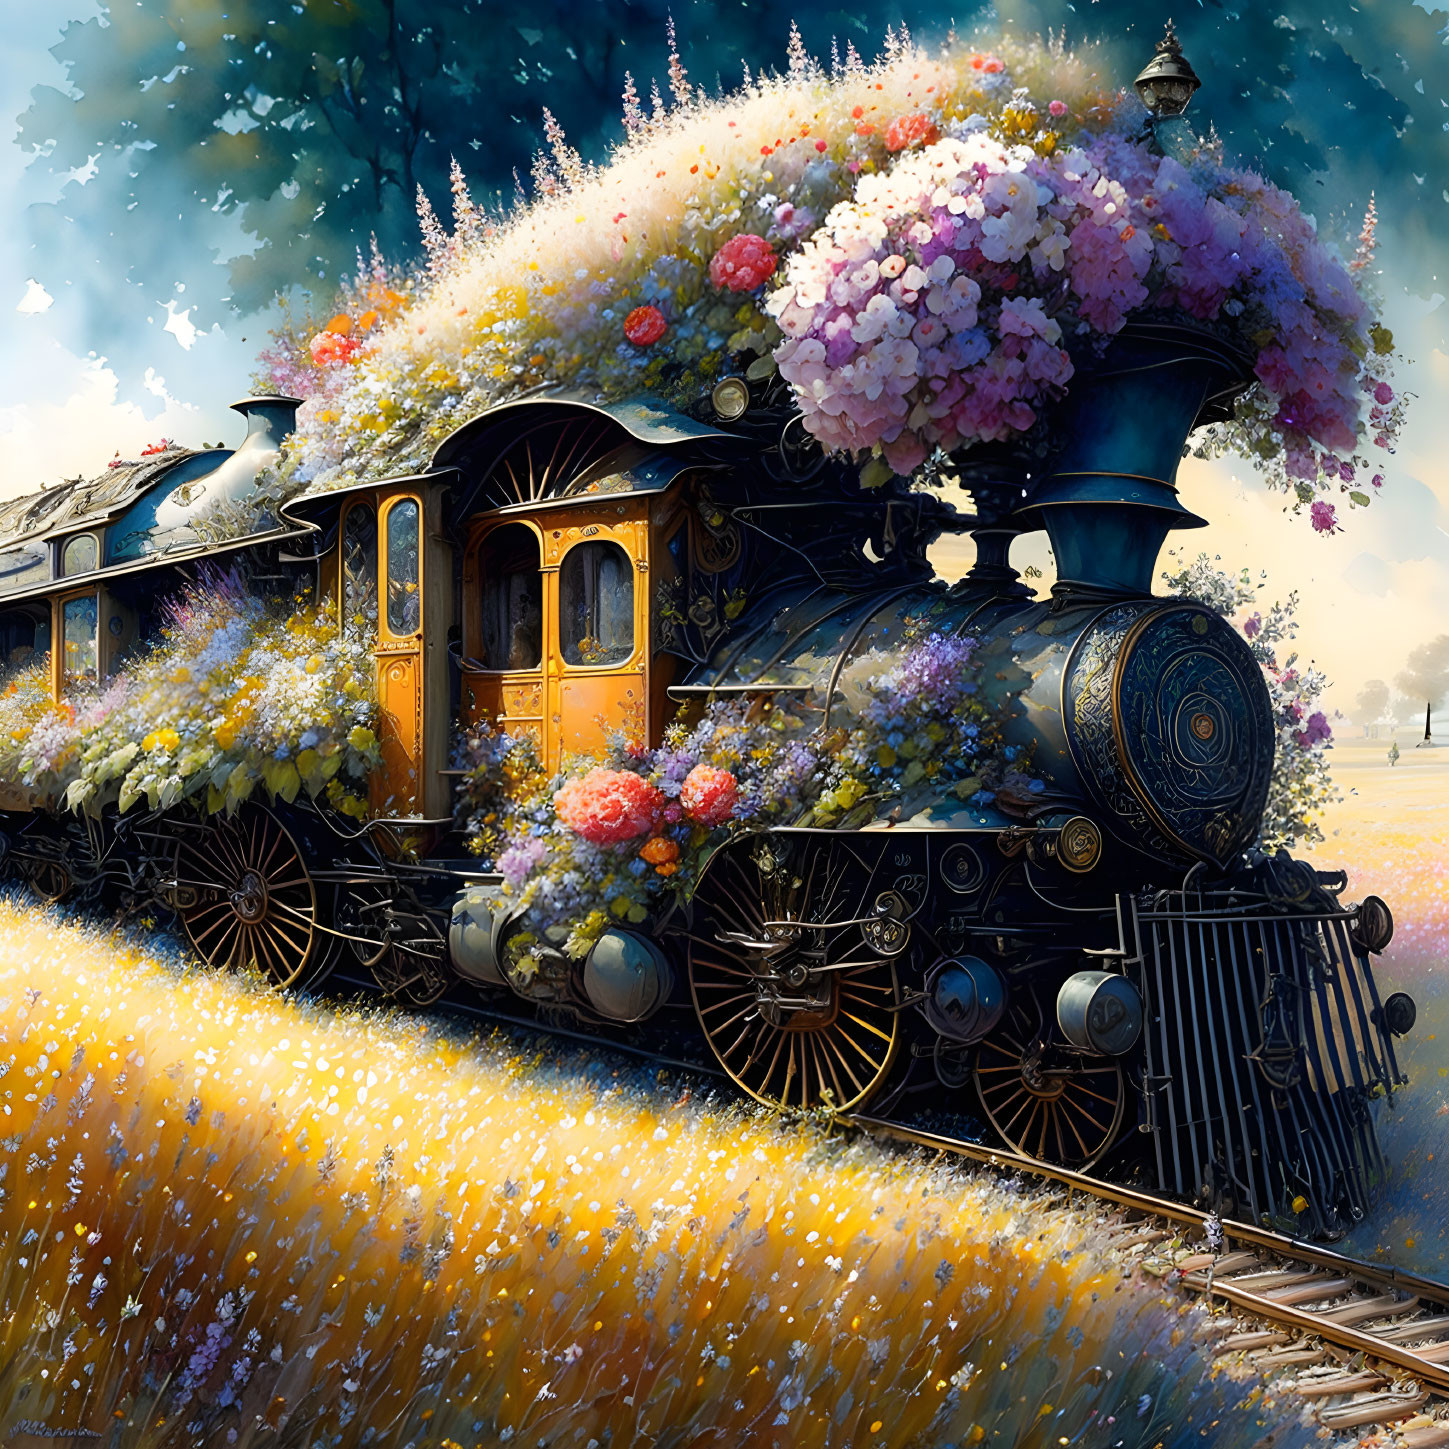 Vintage steam train with vibrant floral decor in luminous field